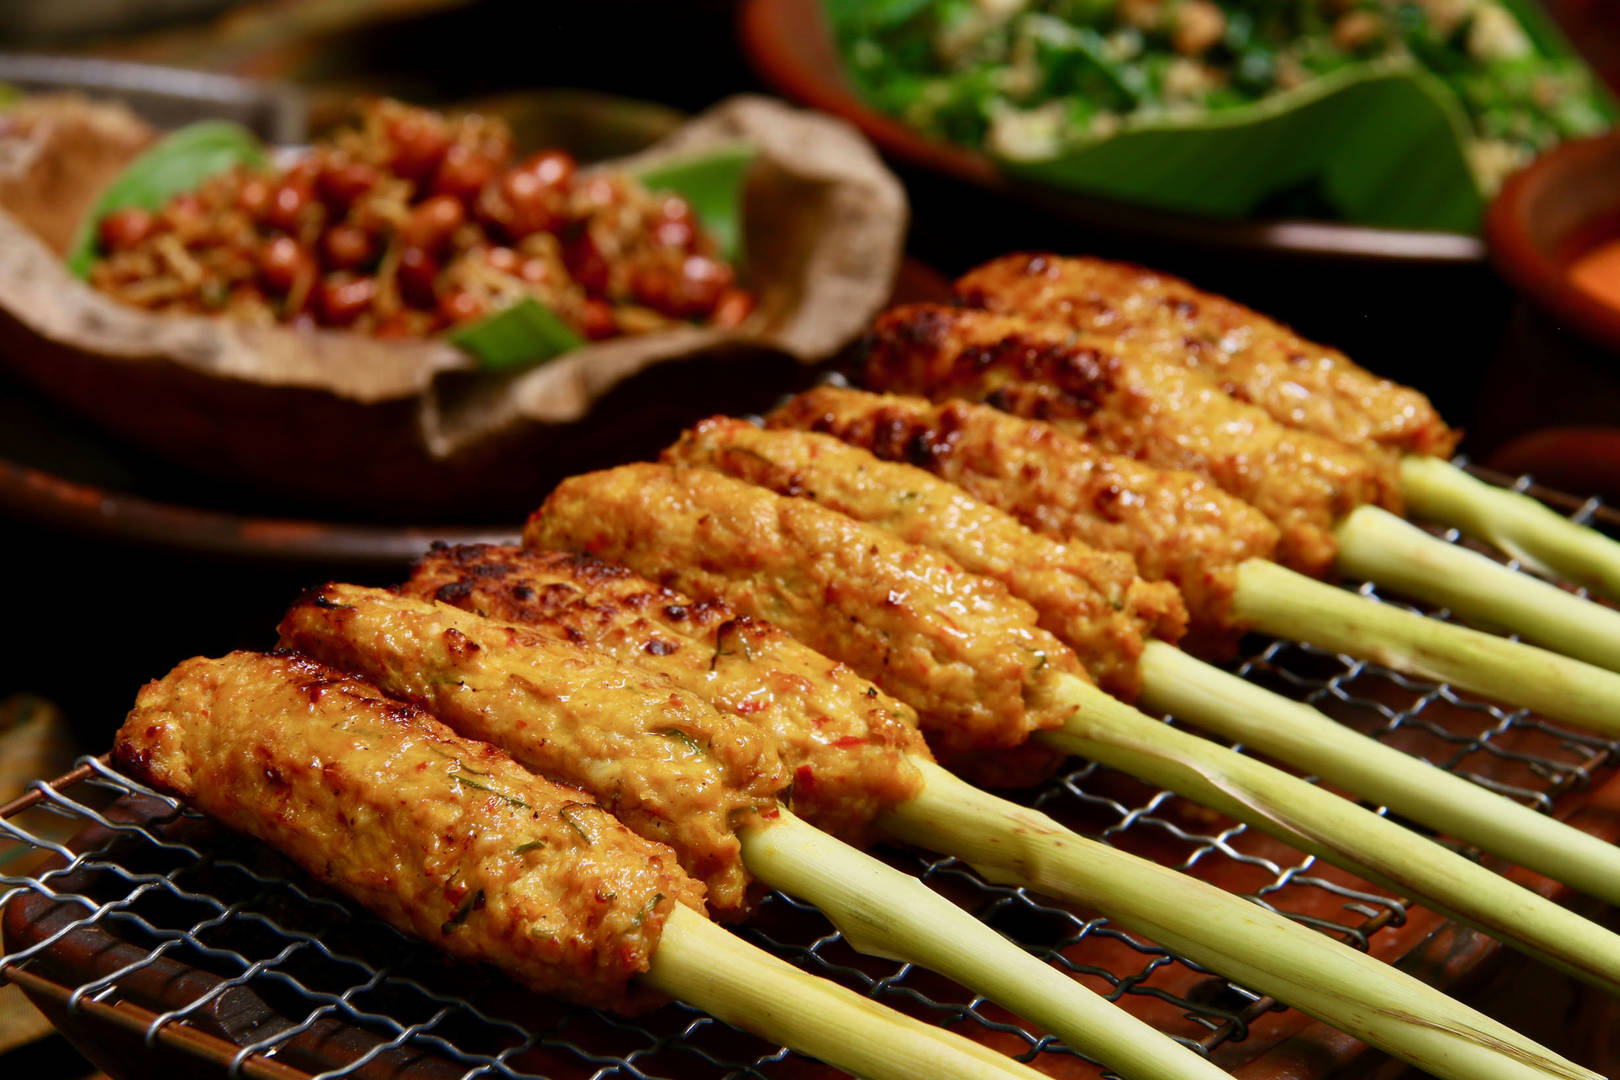 Skewers of Satay Lilit, a Balinese dish, grilling on a barbecue